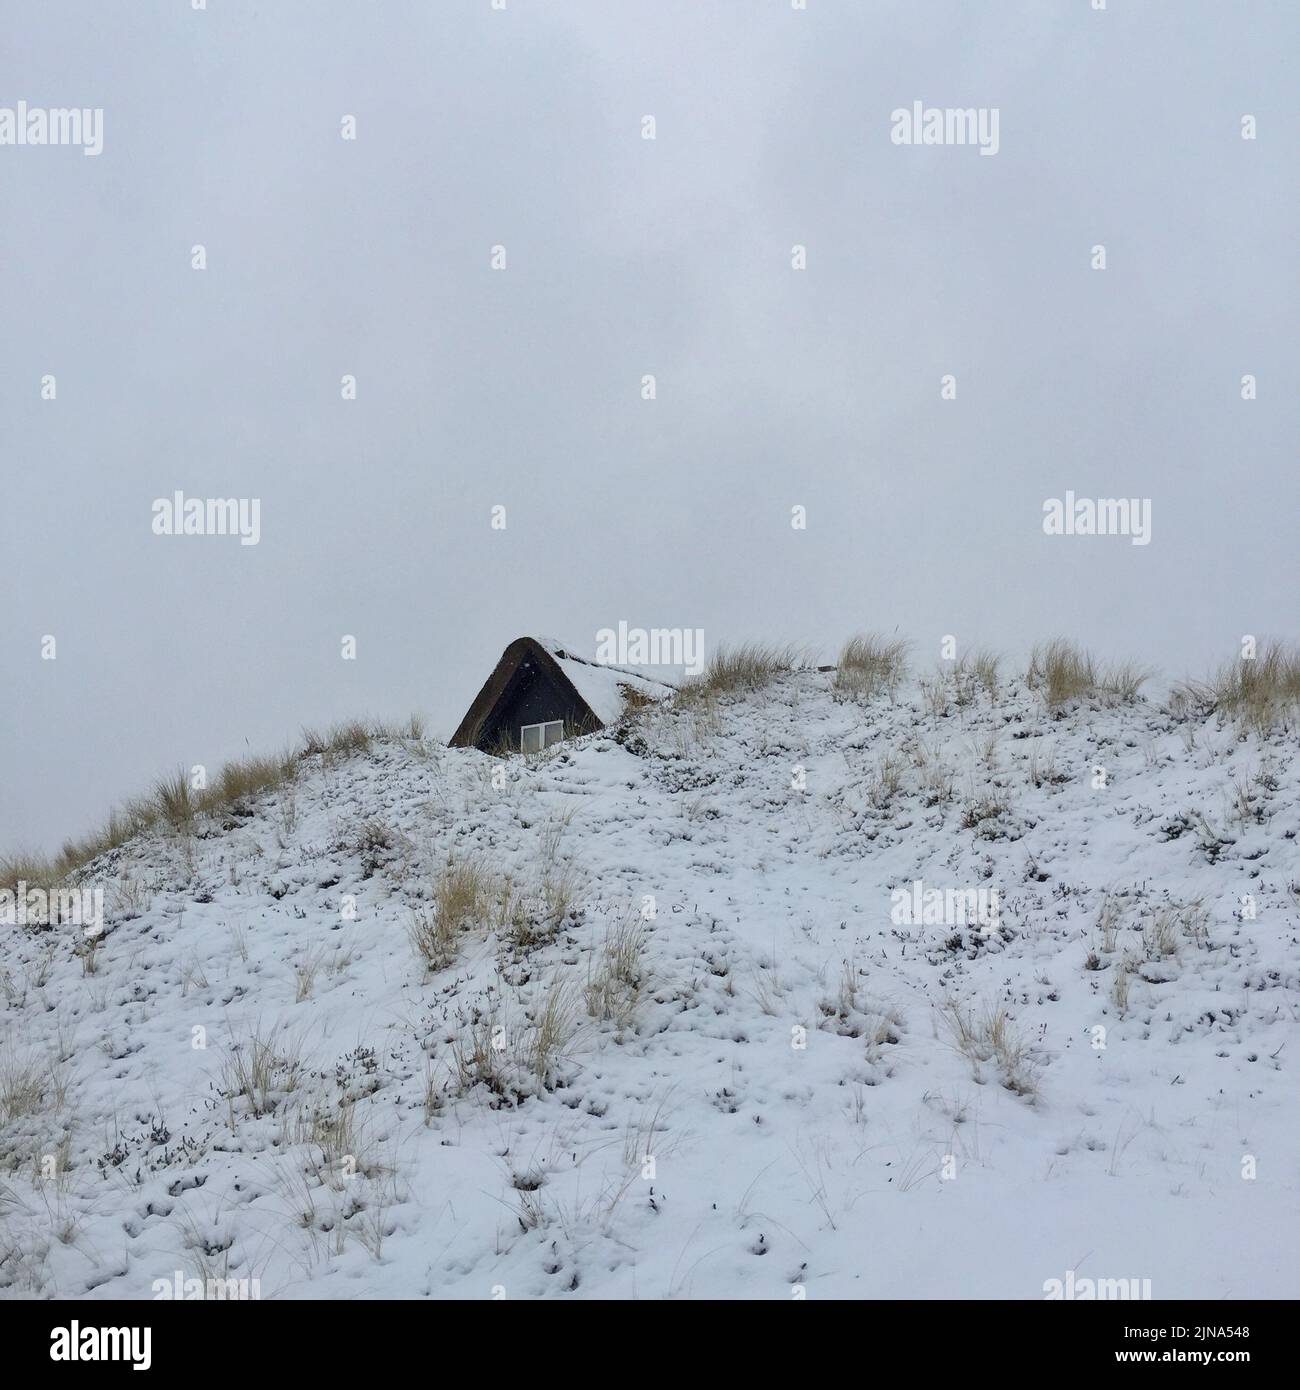 Roof of a traditional summerhouse behind a sand dune in the snow, Fanoe, Jutland, Denmark Stock Photo